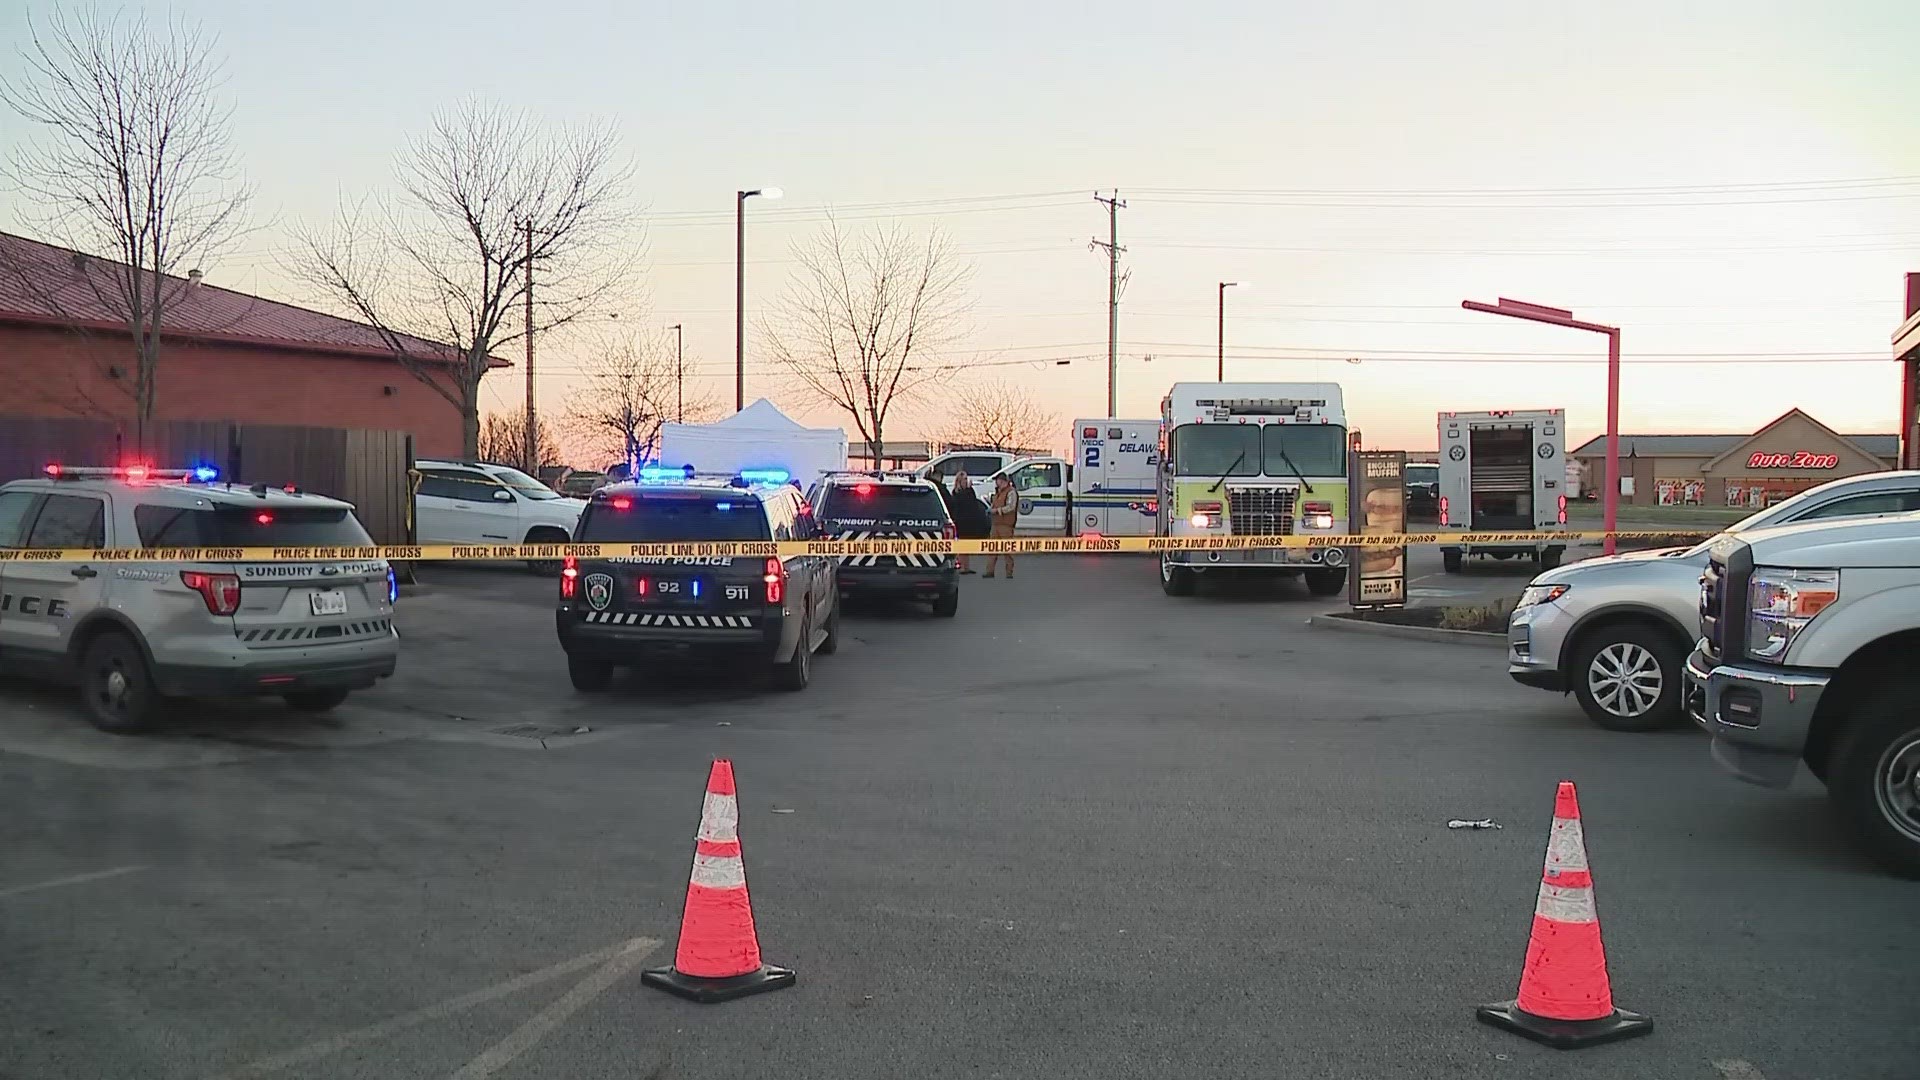 A man is dead and a suspect is in custody after a shooting outside a Wendy's in Sunbury Thursday afternoon, according to police.